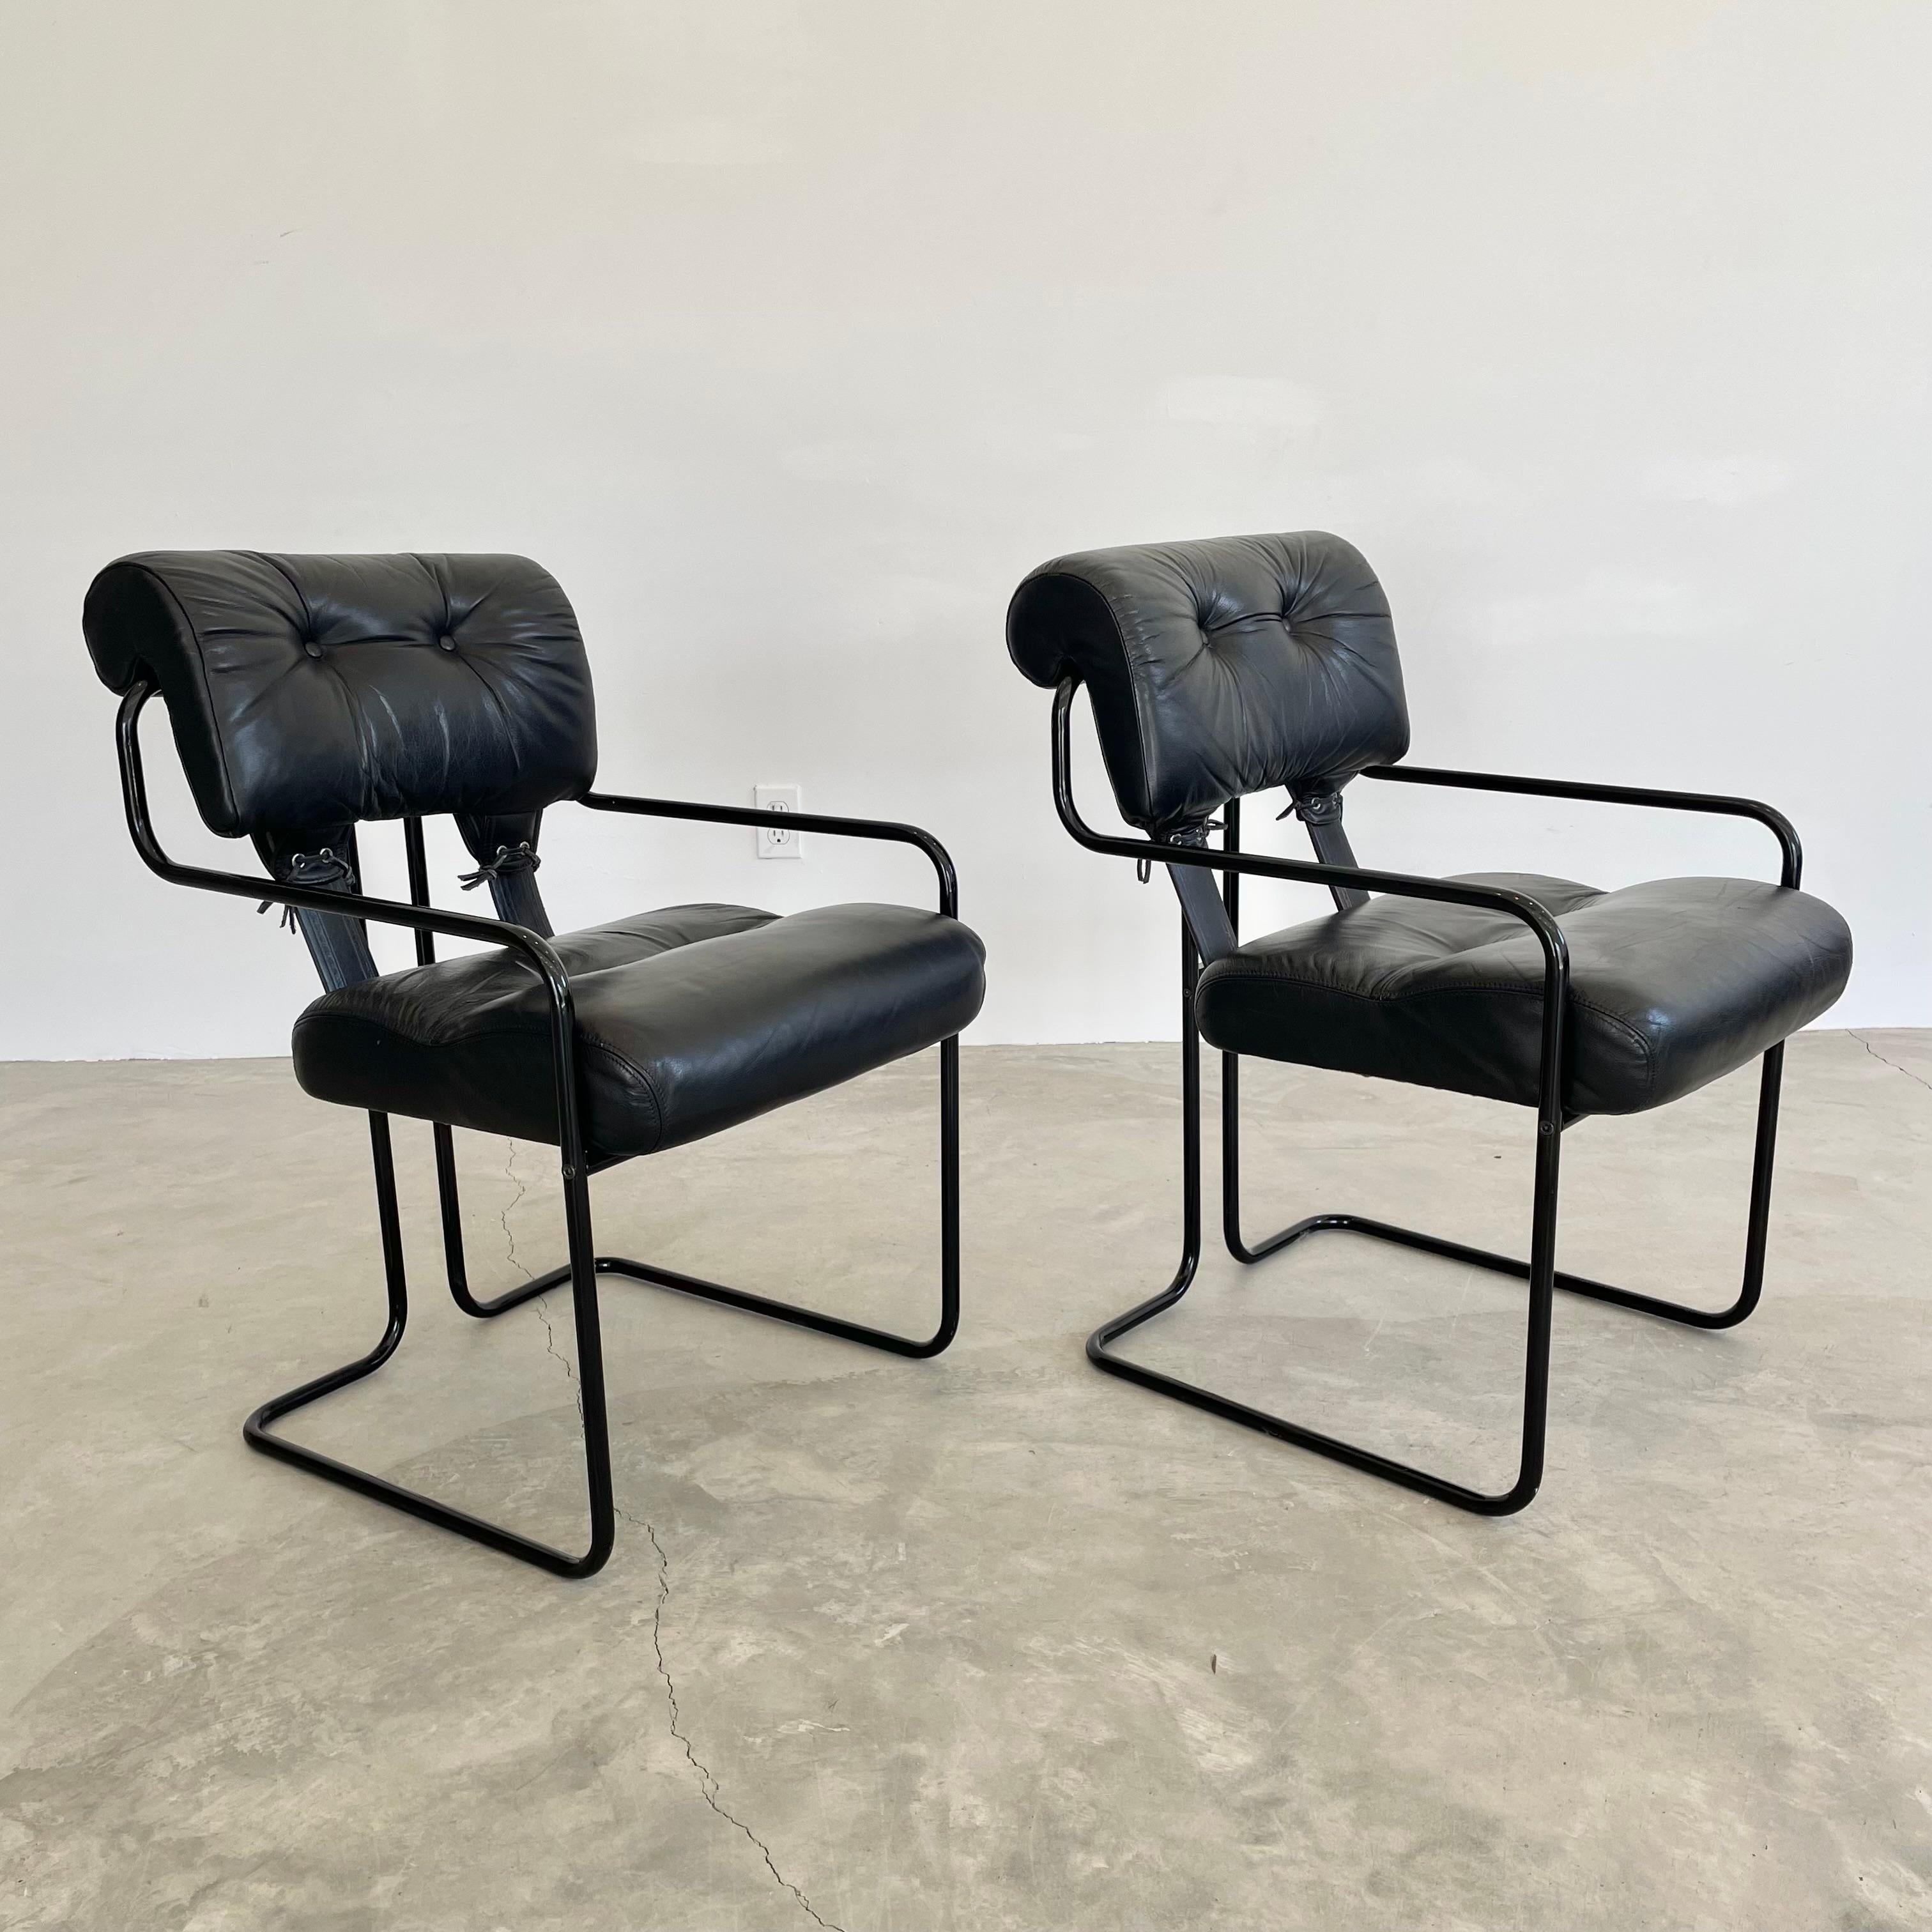 Late 20th Century Guido Faleschini Tucroma Dining Chairs in Black Leather for Mariani, 1980s Italy For Sale